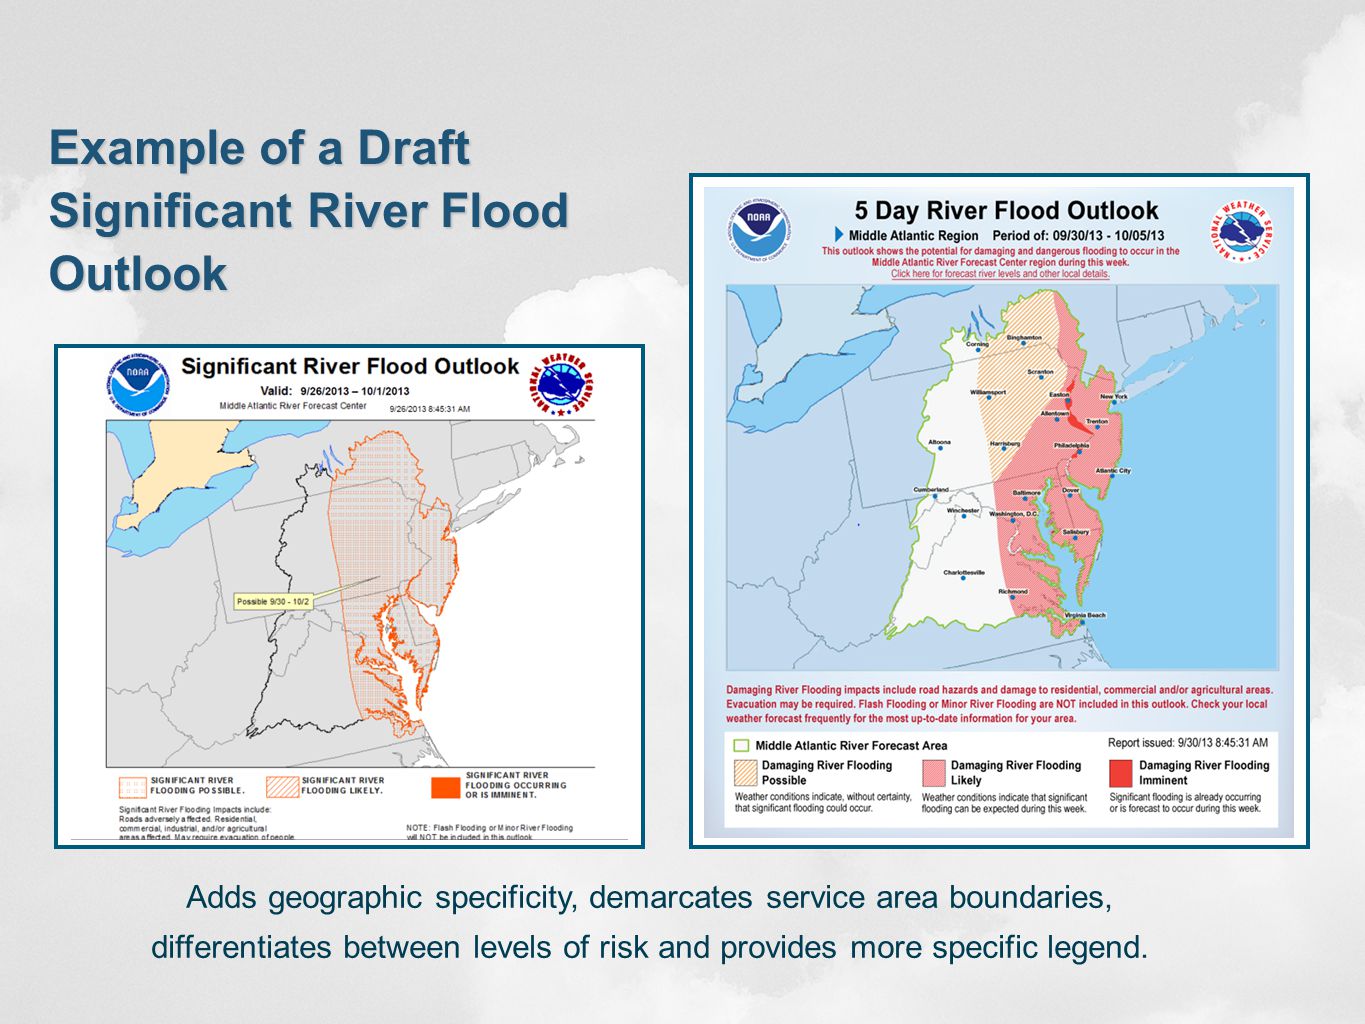 Example of a Draft Significant River Flood Outlook Adds geographic specificity, demarcates service area boundaries, differentiates between levels of risk and provides more specific legend.